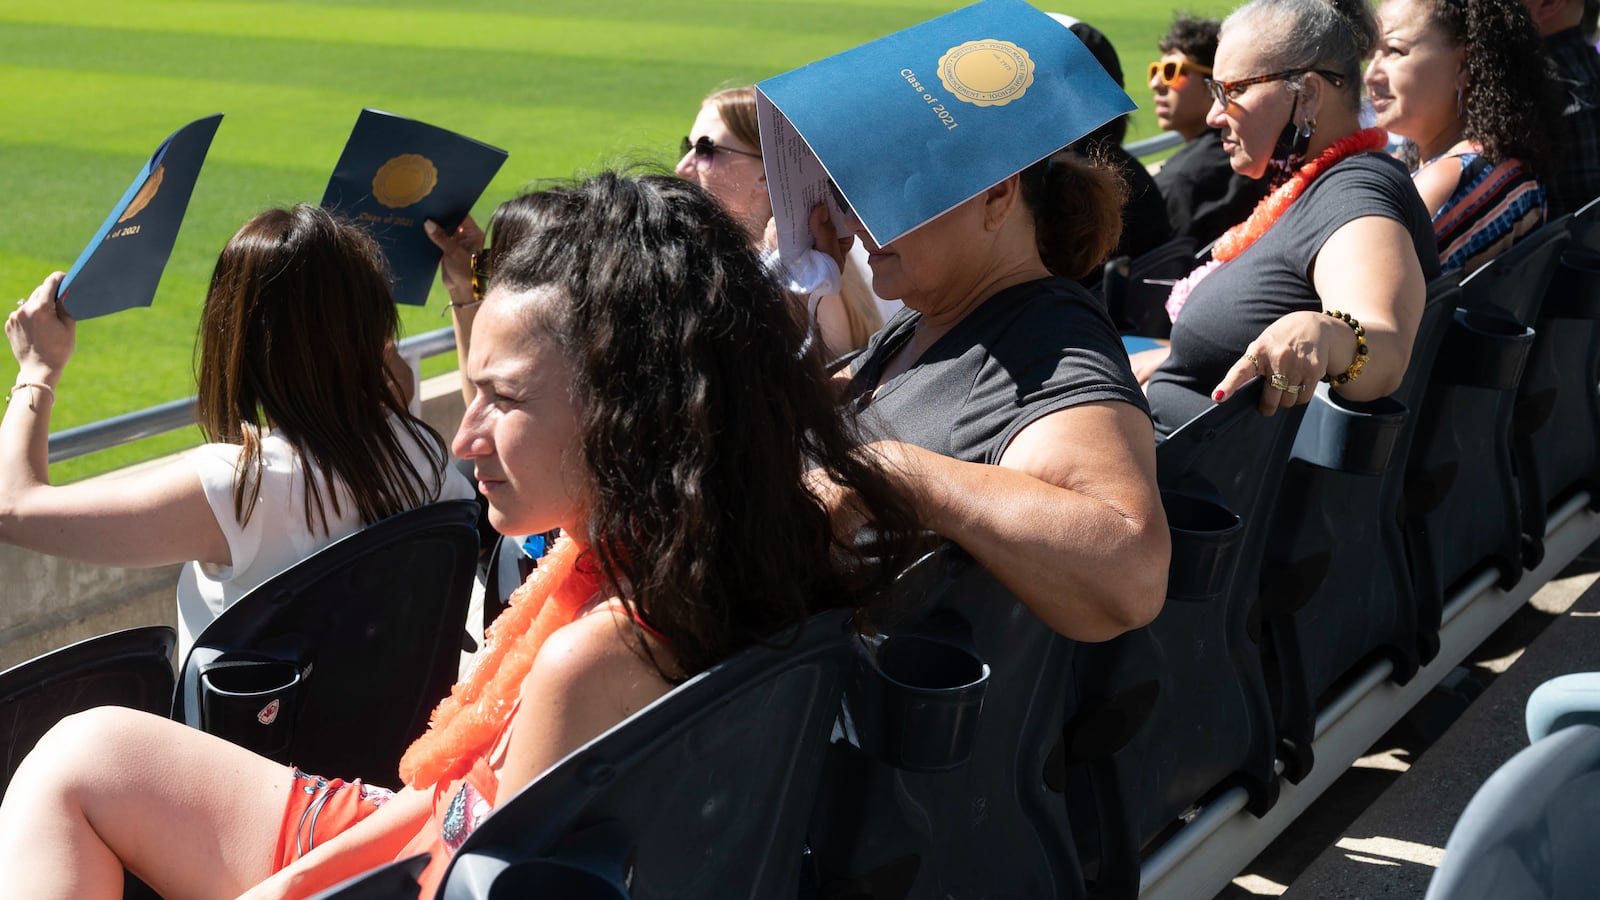 Family members sit in stadium seating and use graduation programs to shade themselves.